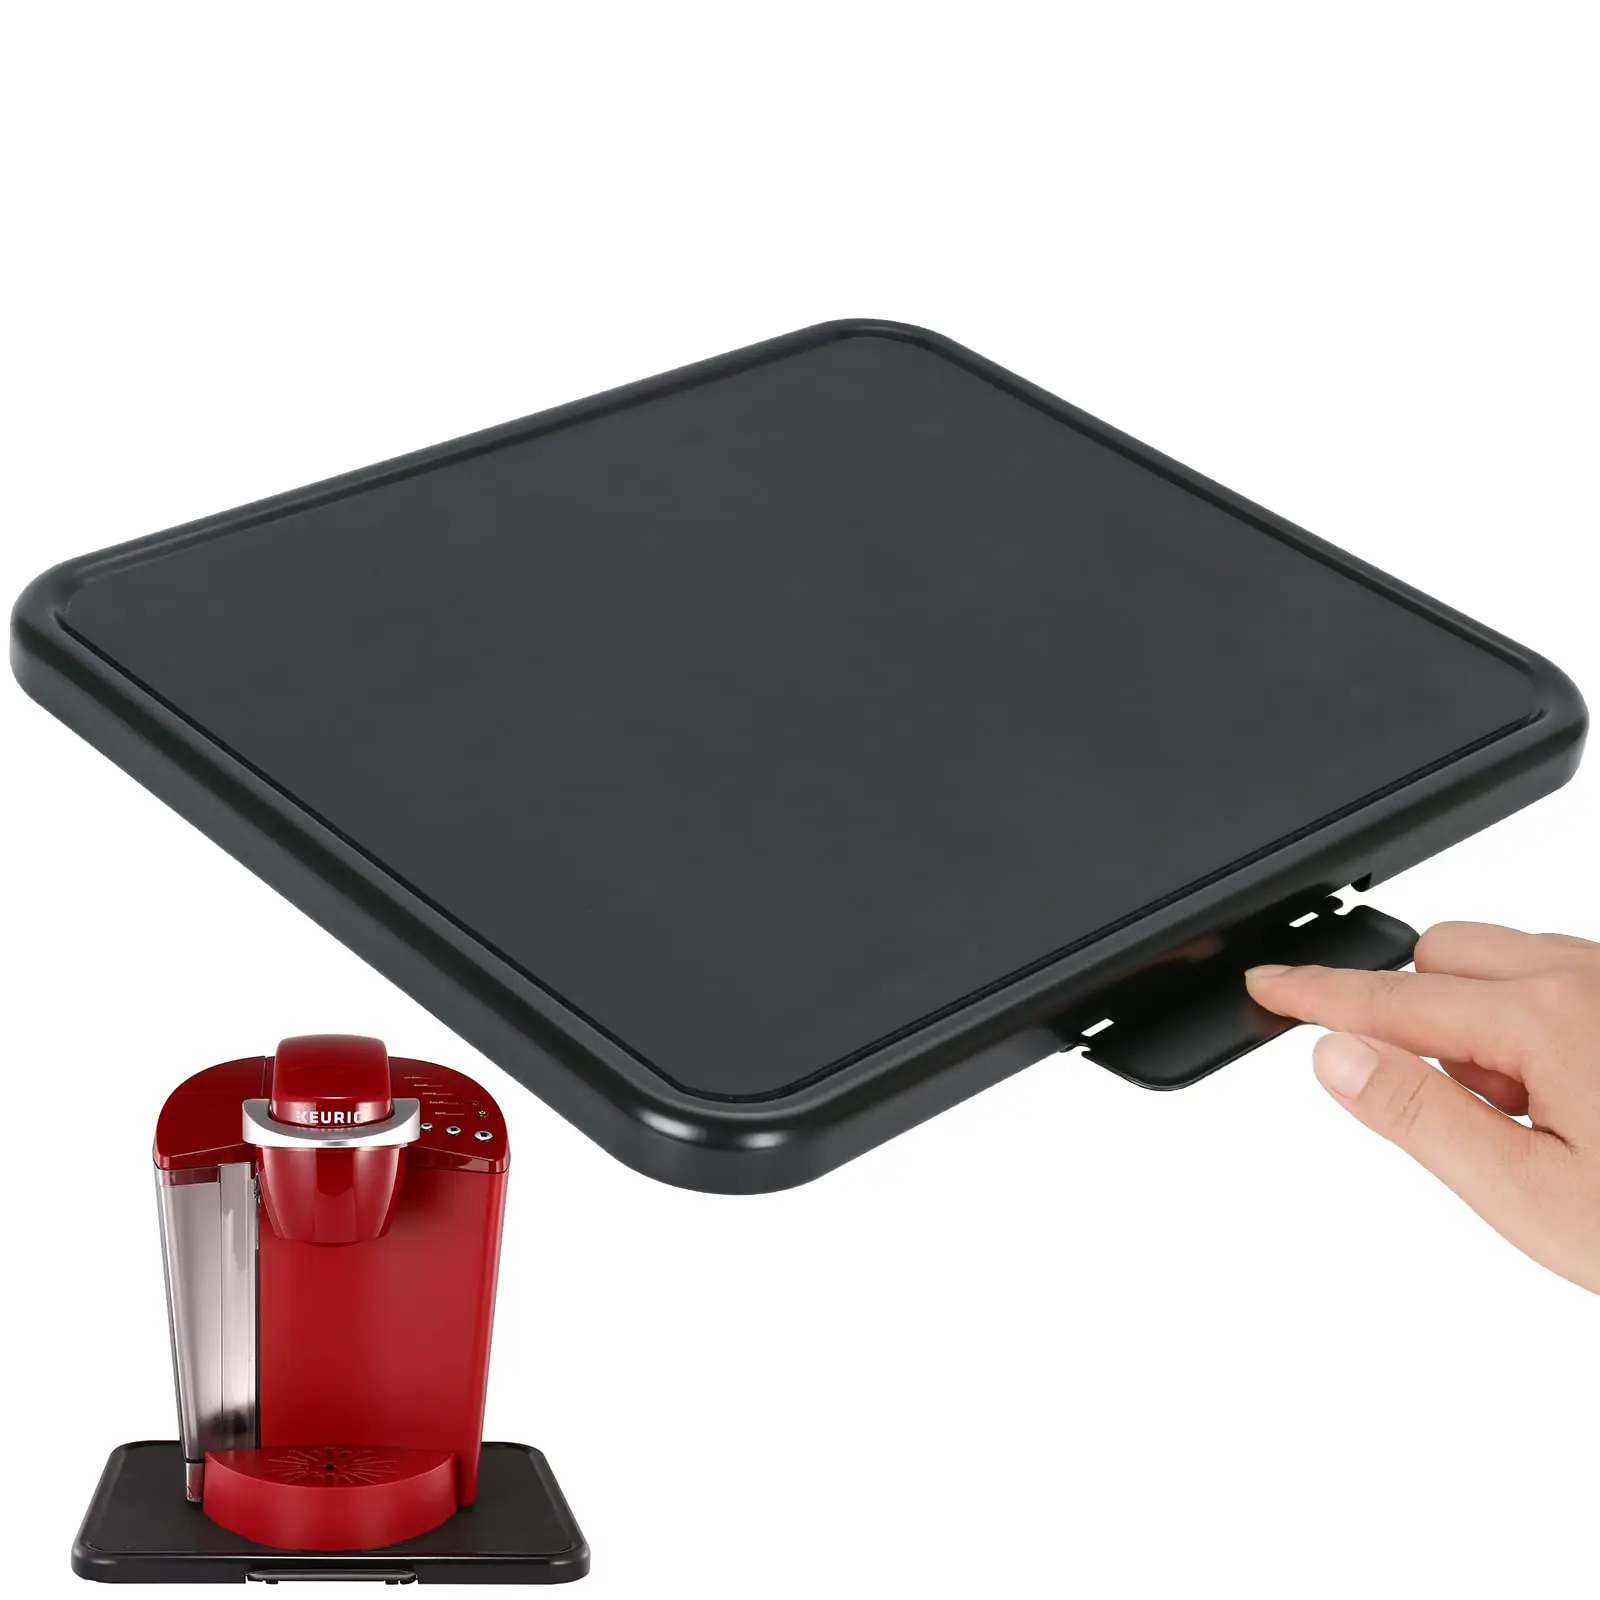 Large Load Capacity ABS Counter Slider Black Square Appliance Sliding Tray  For Coffee Maker - Buy Large Load Capacity ABS Counter Slider Black Square  Appliance Sliding Tray For Coffee Maker Product on